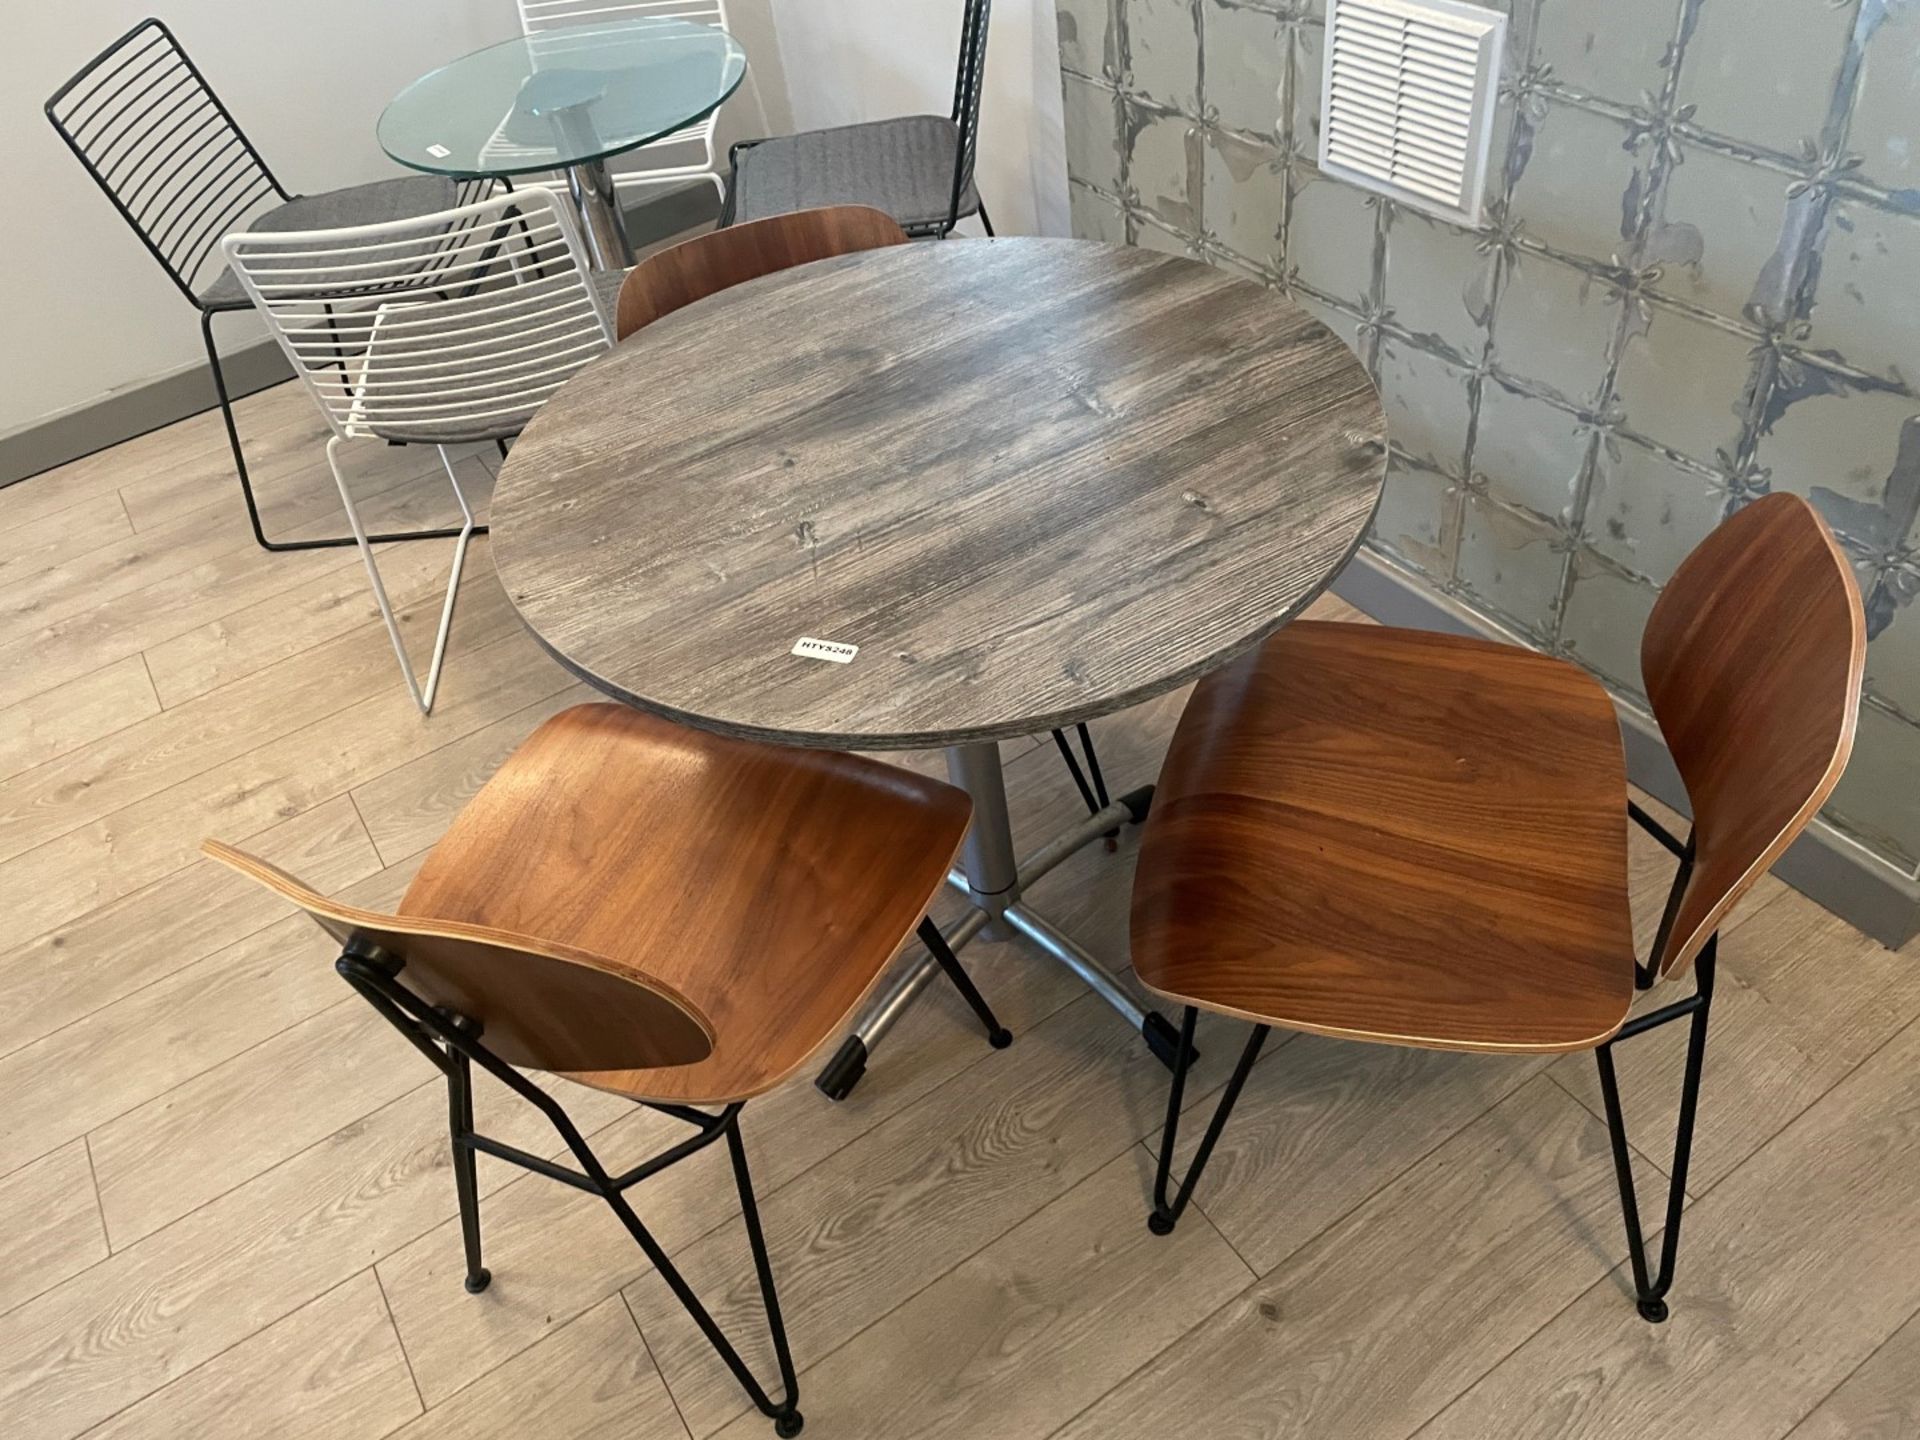 1 x Round 80cm Wooden Driftwood Table With Chrome Base and Three Contemporary Chairs - Ref: - Image 4 of 5